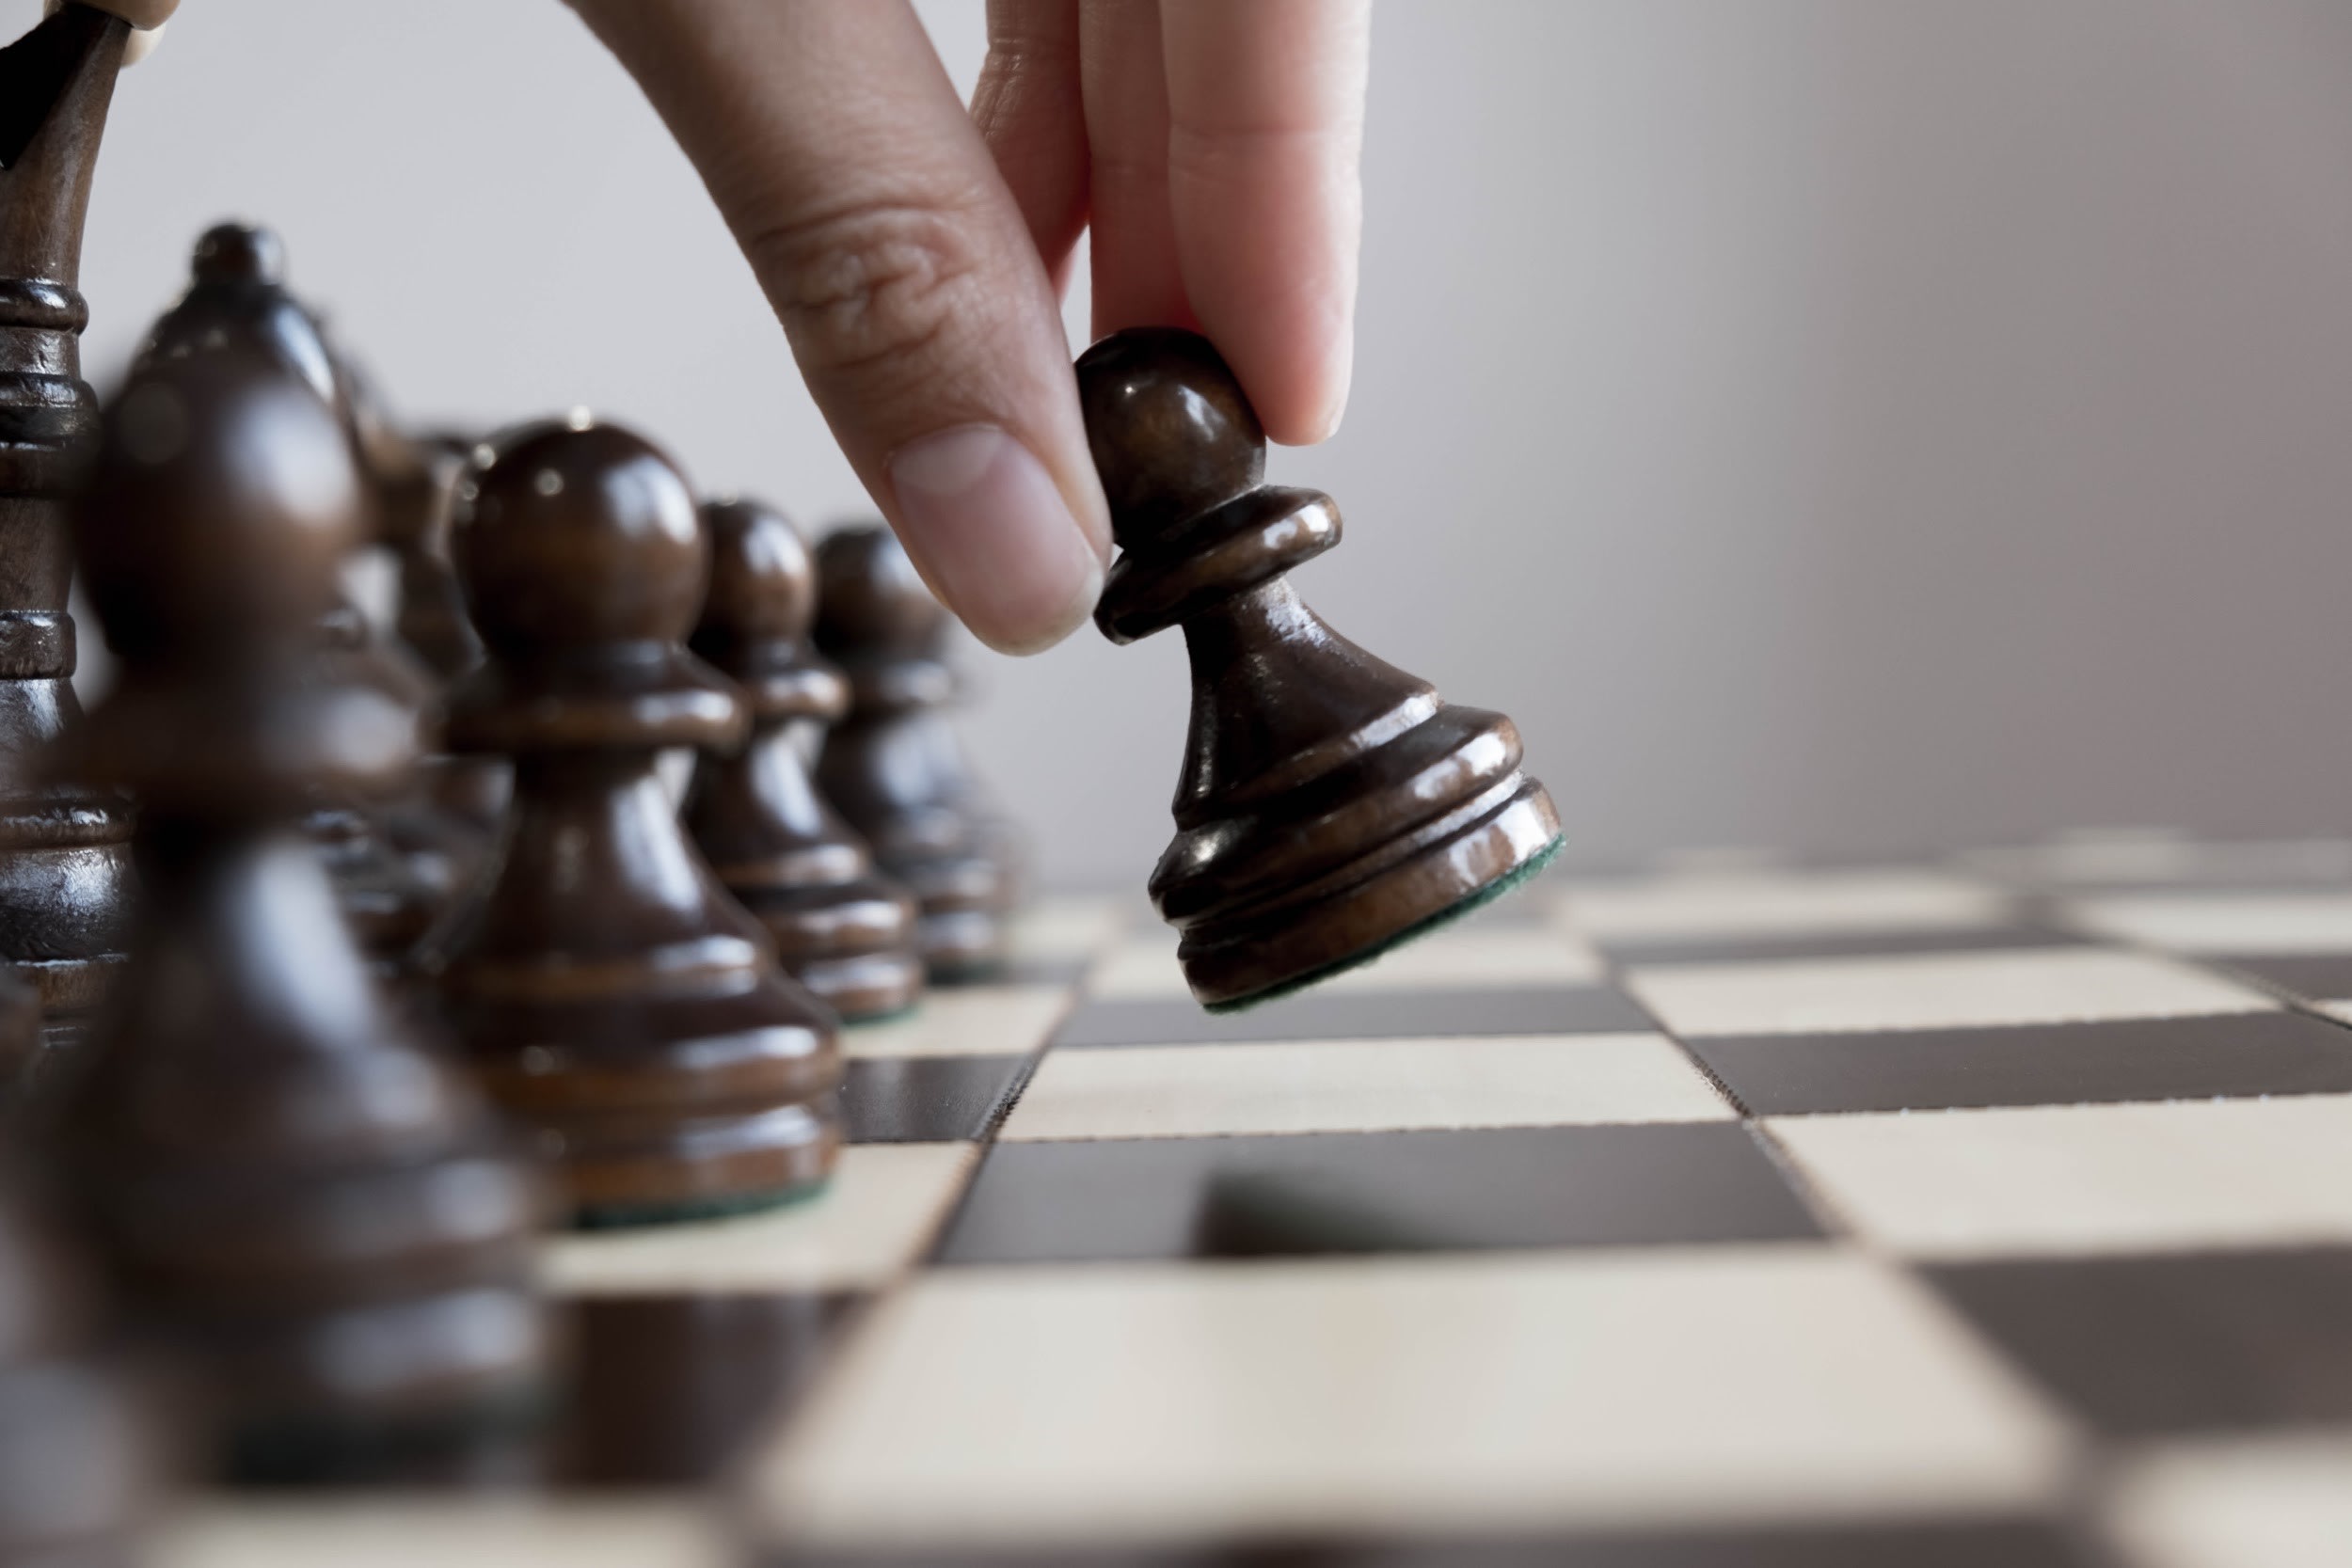 Image of a chessboard with a hand moving a pawn